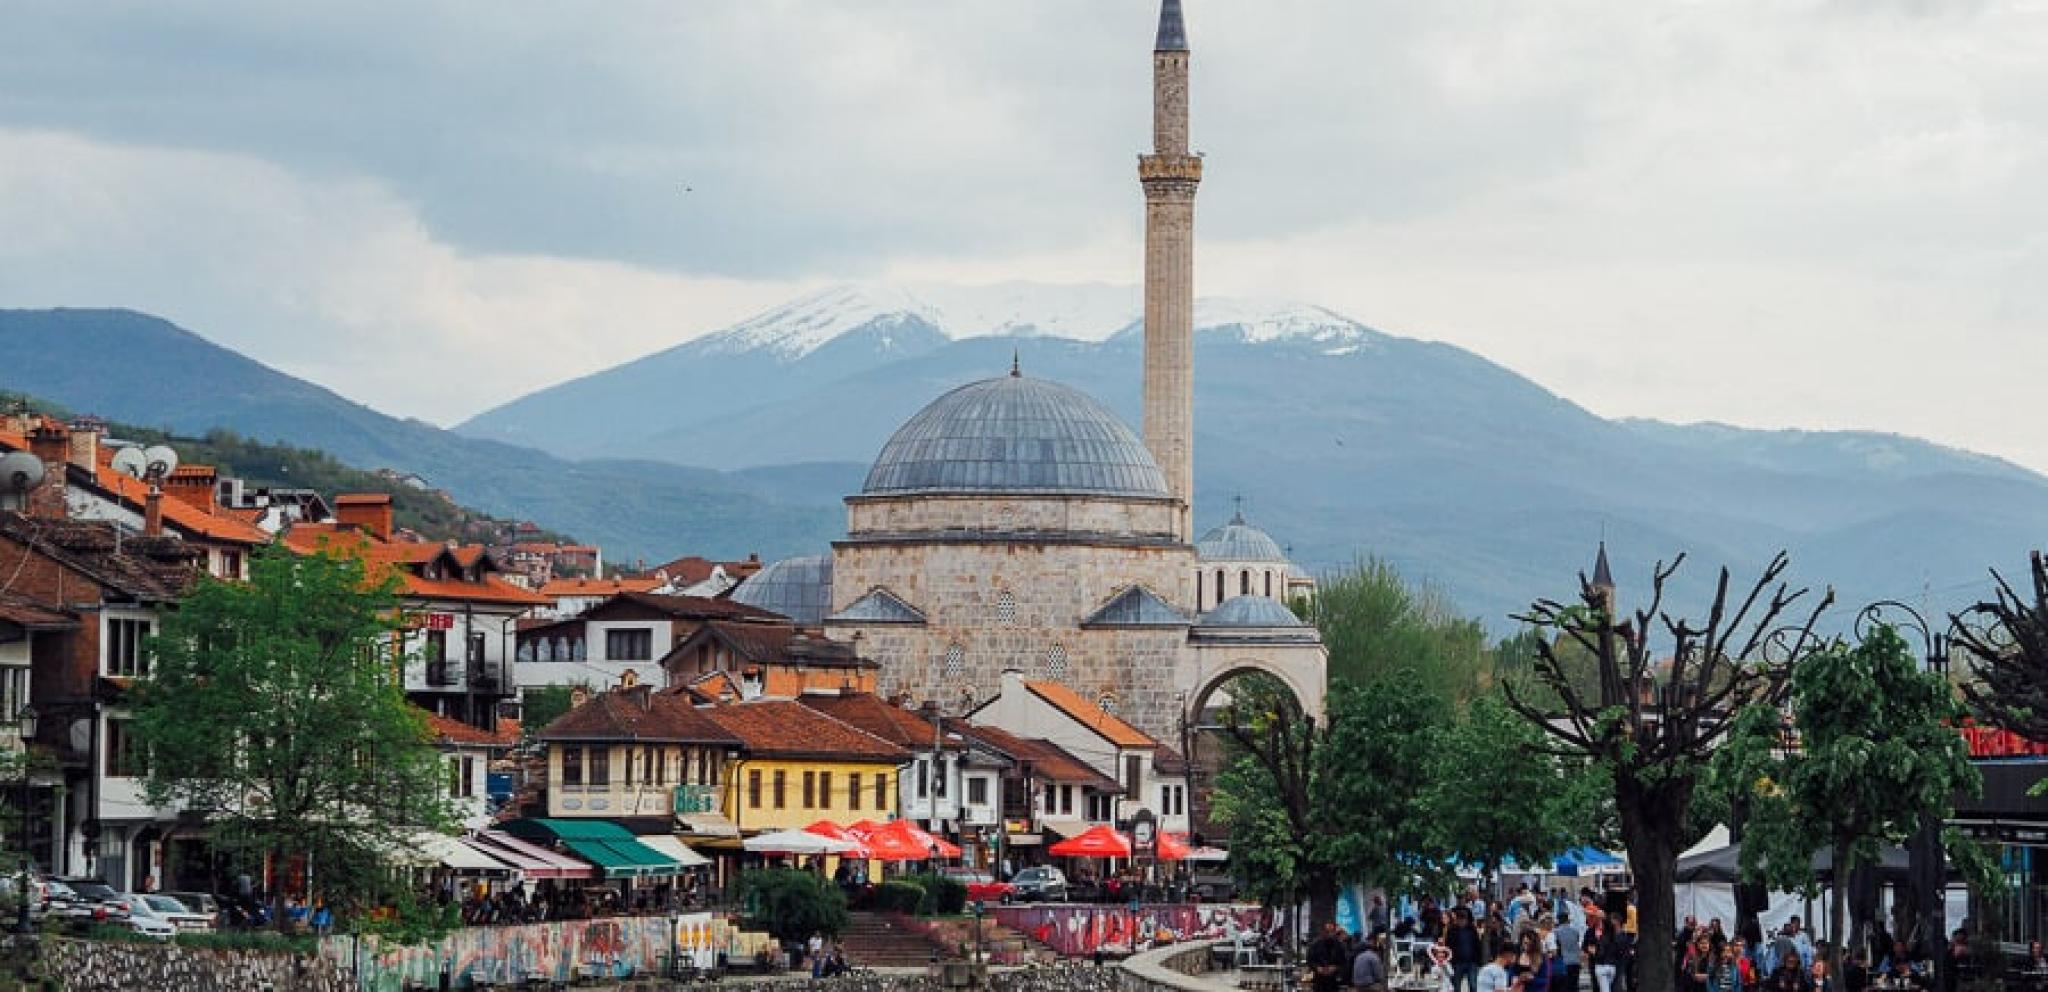 Prizren waterfront and the Bistrica River.